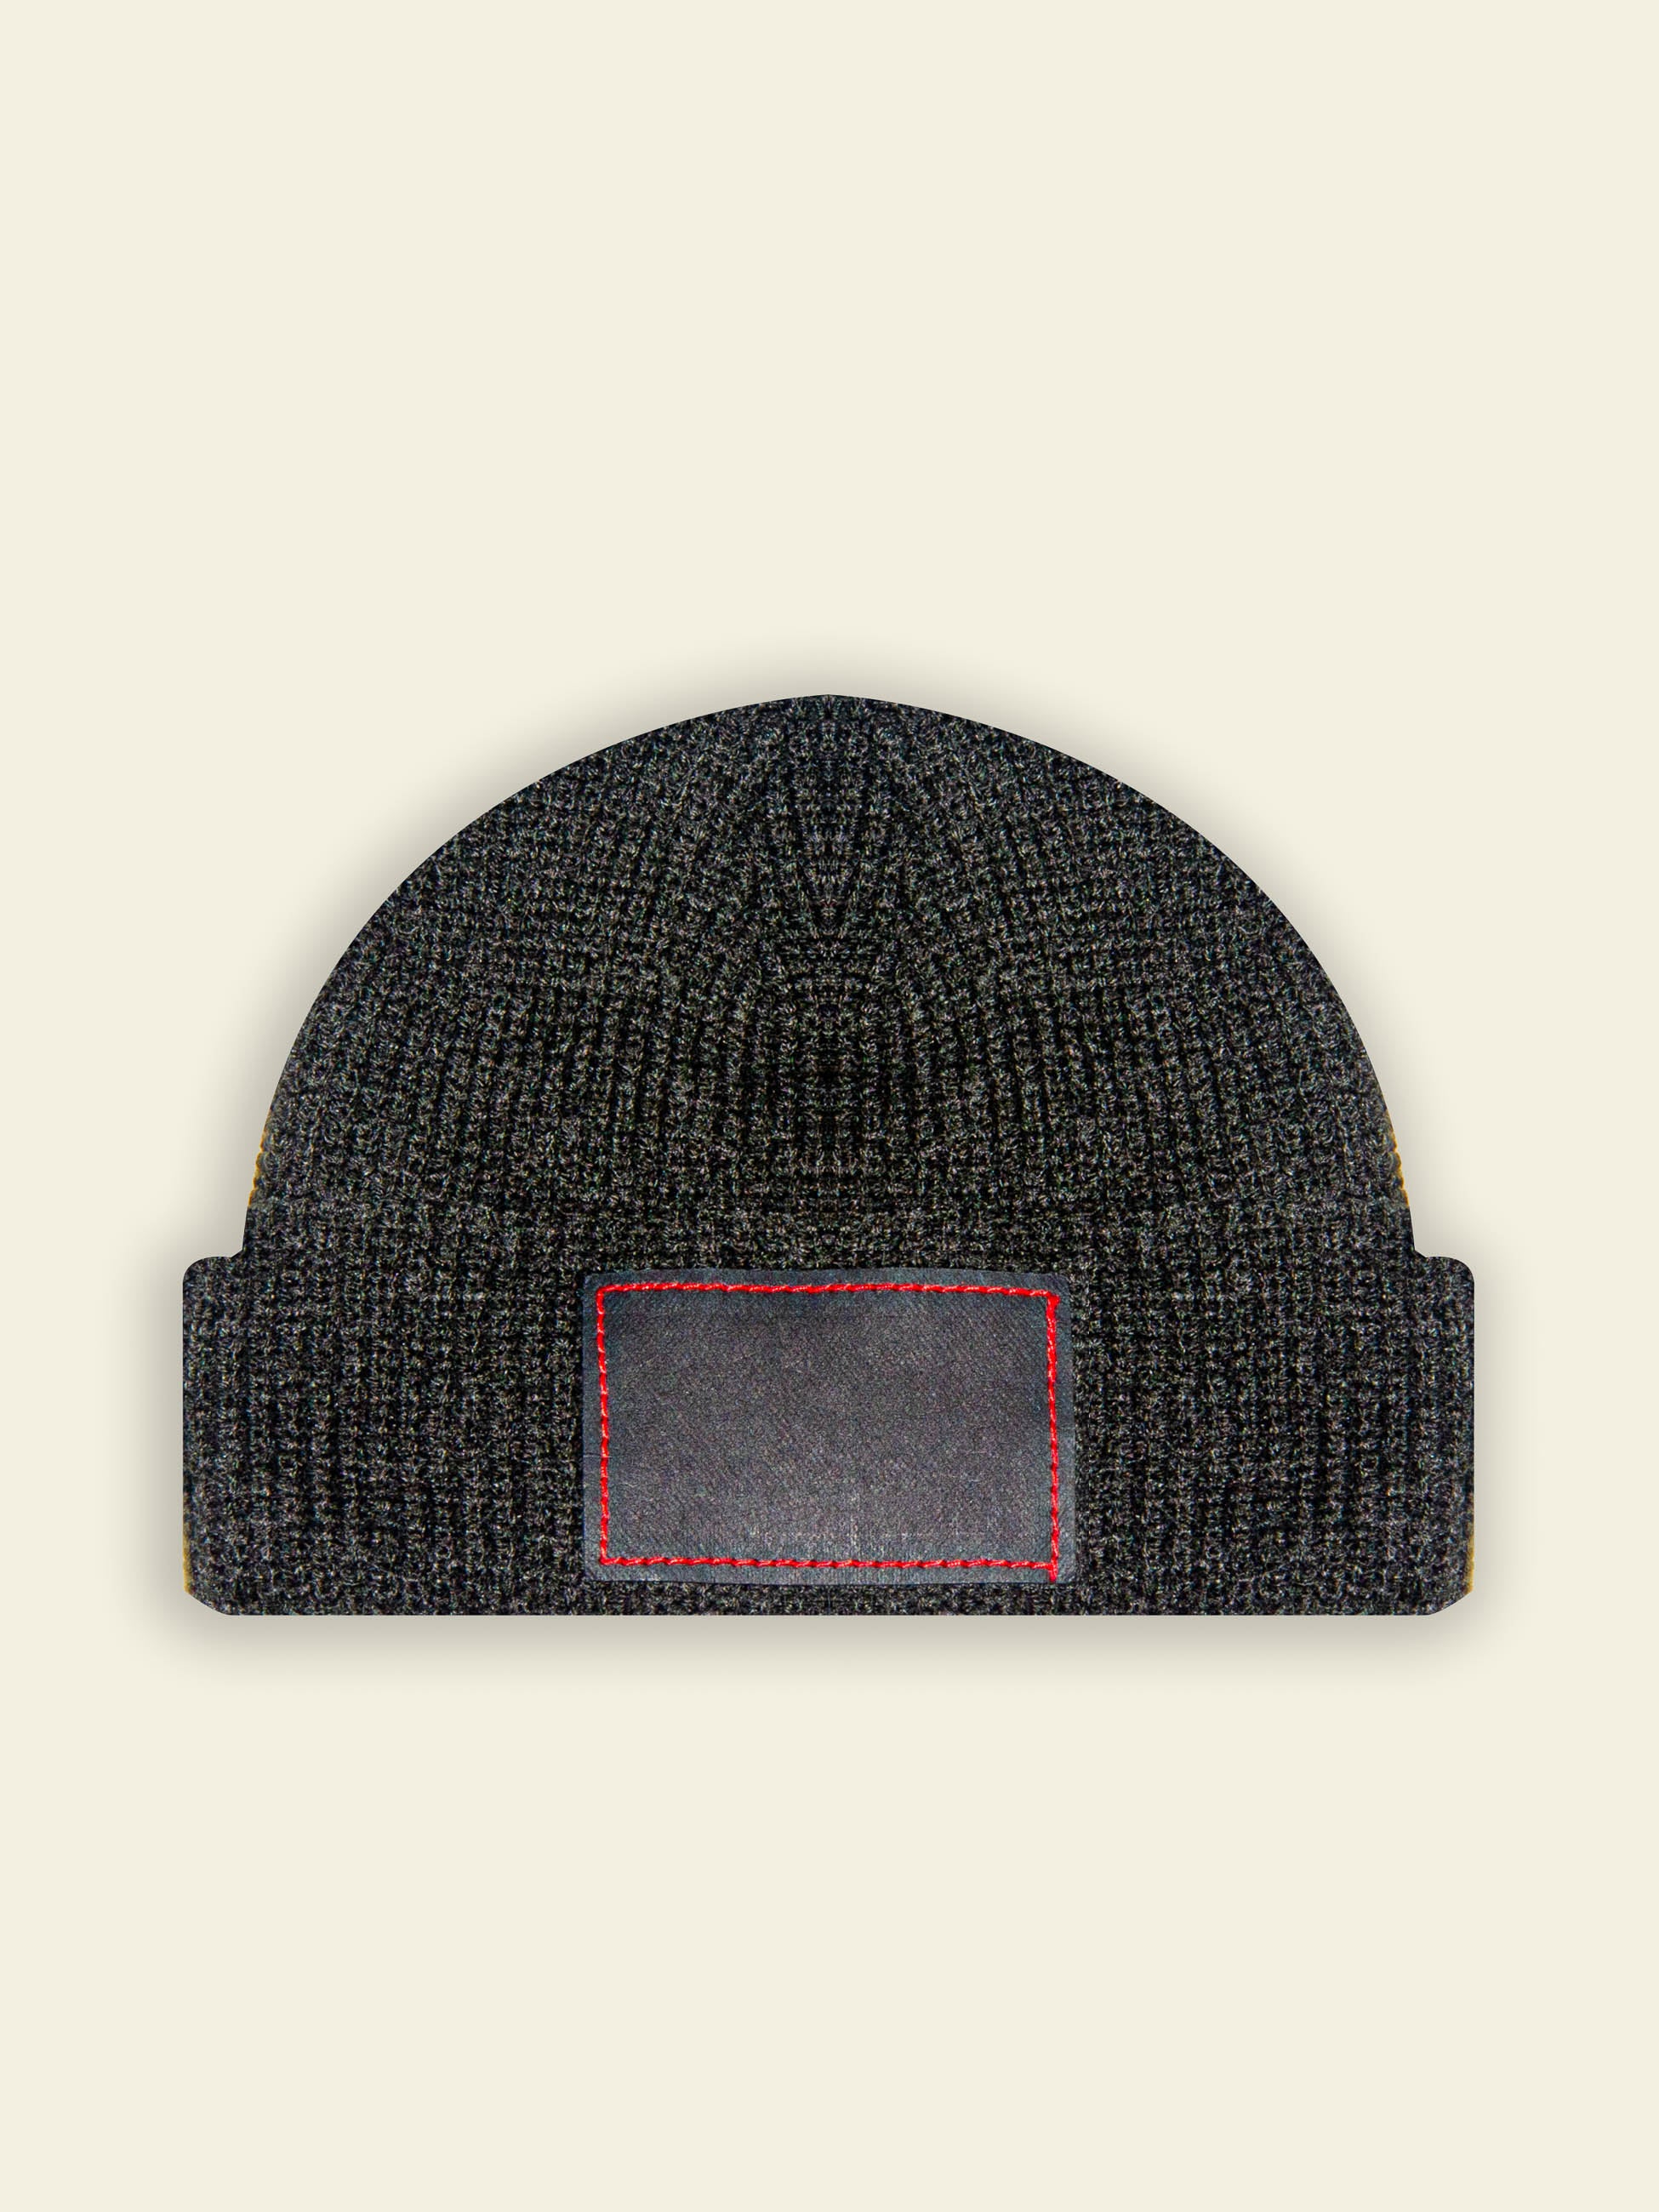 Publik Brand Fisherman Beanie Anchor Gray, all made in USA, Front